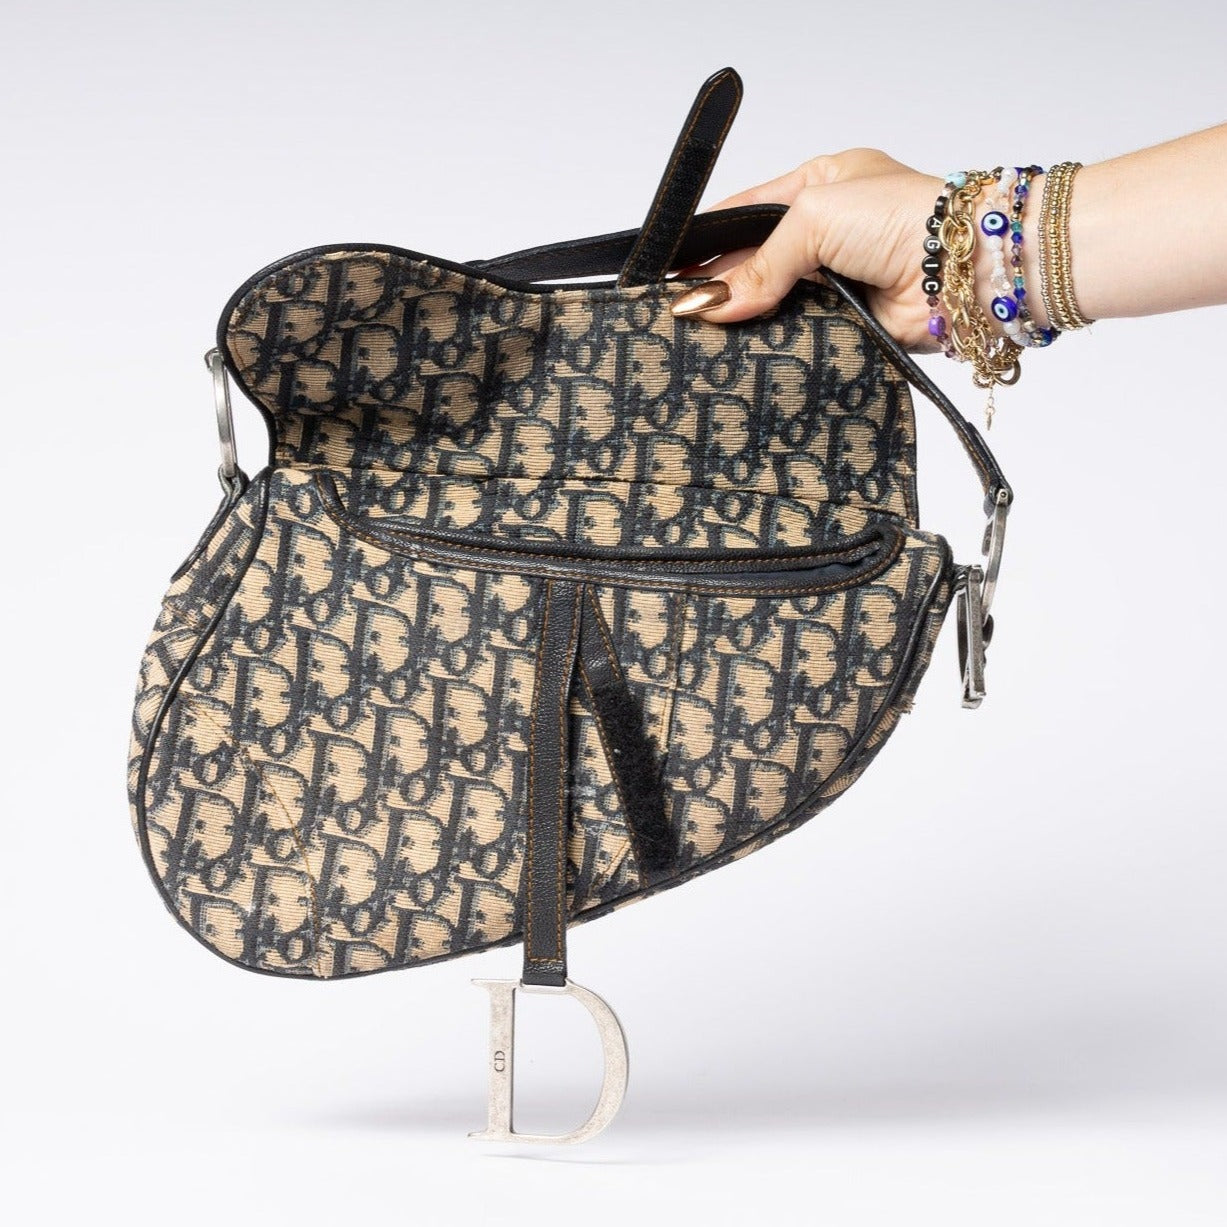 Vintage Dior Saddle Bag - Iconic style and timeless elegance in a classic fashion accessory